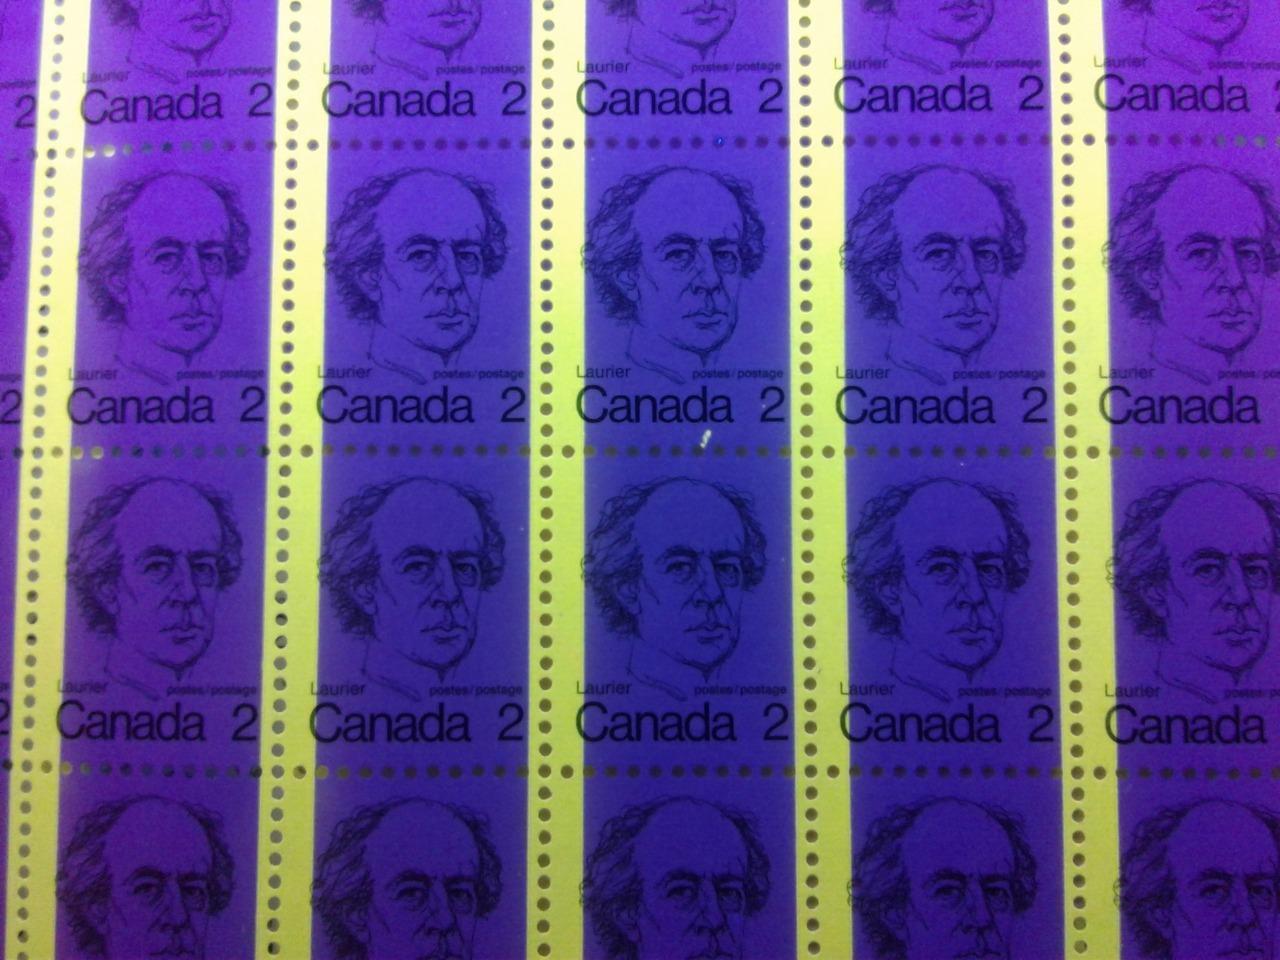 Canada #587v (SG#694) 2c Green Laurier 1972-1978 Caricature Issue DF Ribbed Paper Type 1 Full Sheet VF-75 NH Brixton Chrome 